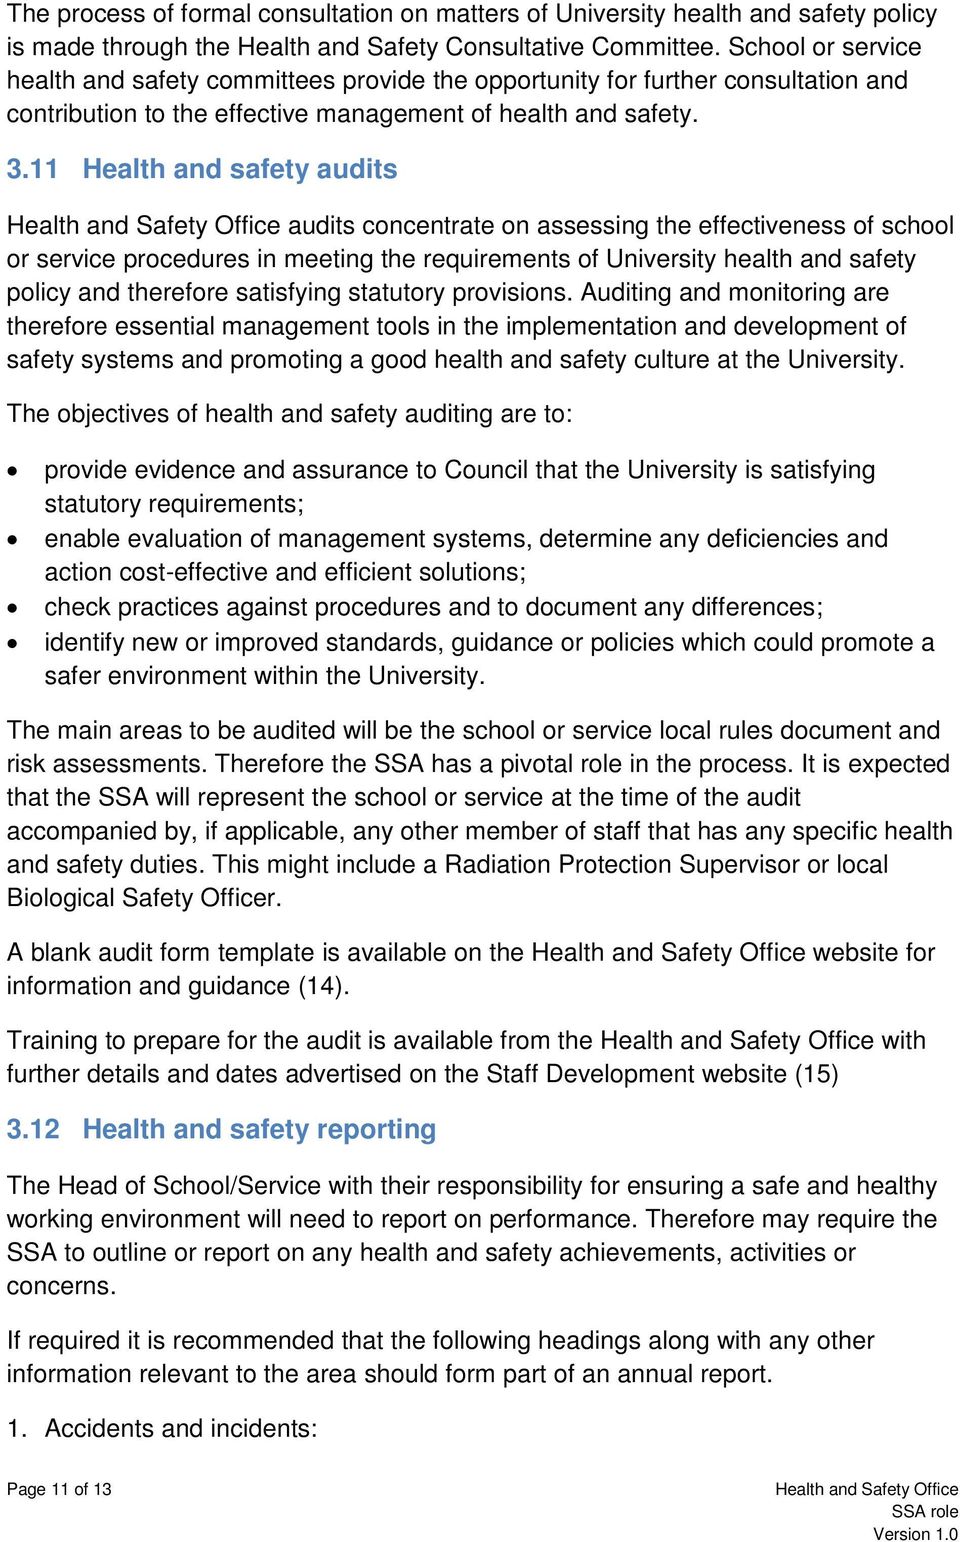 11 Health and safety audits audits concentrate on assessing the effectiveness of school or service procedures in meeting the requirements of University health and safety policy and therefore